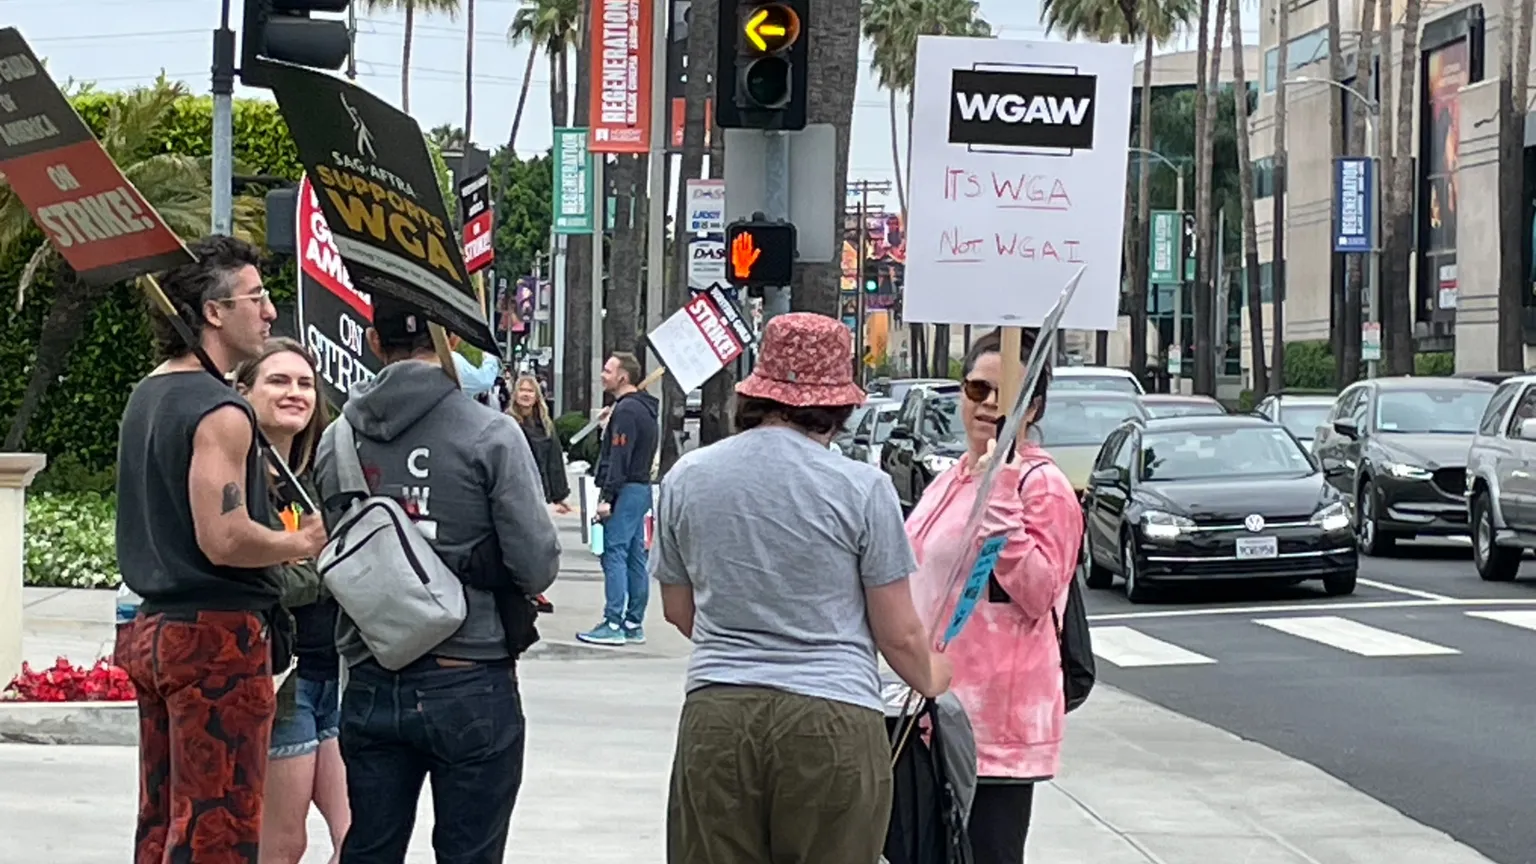 A writer holdings a sign that says "It's WGA NOT WGAI"